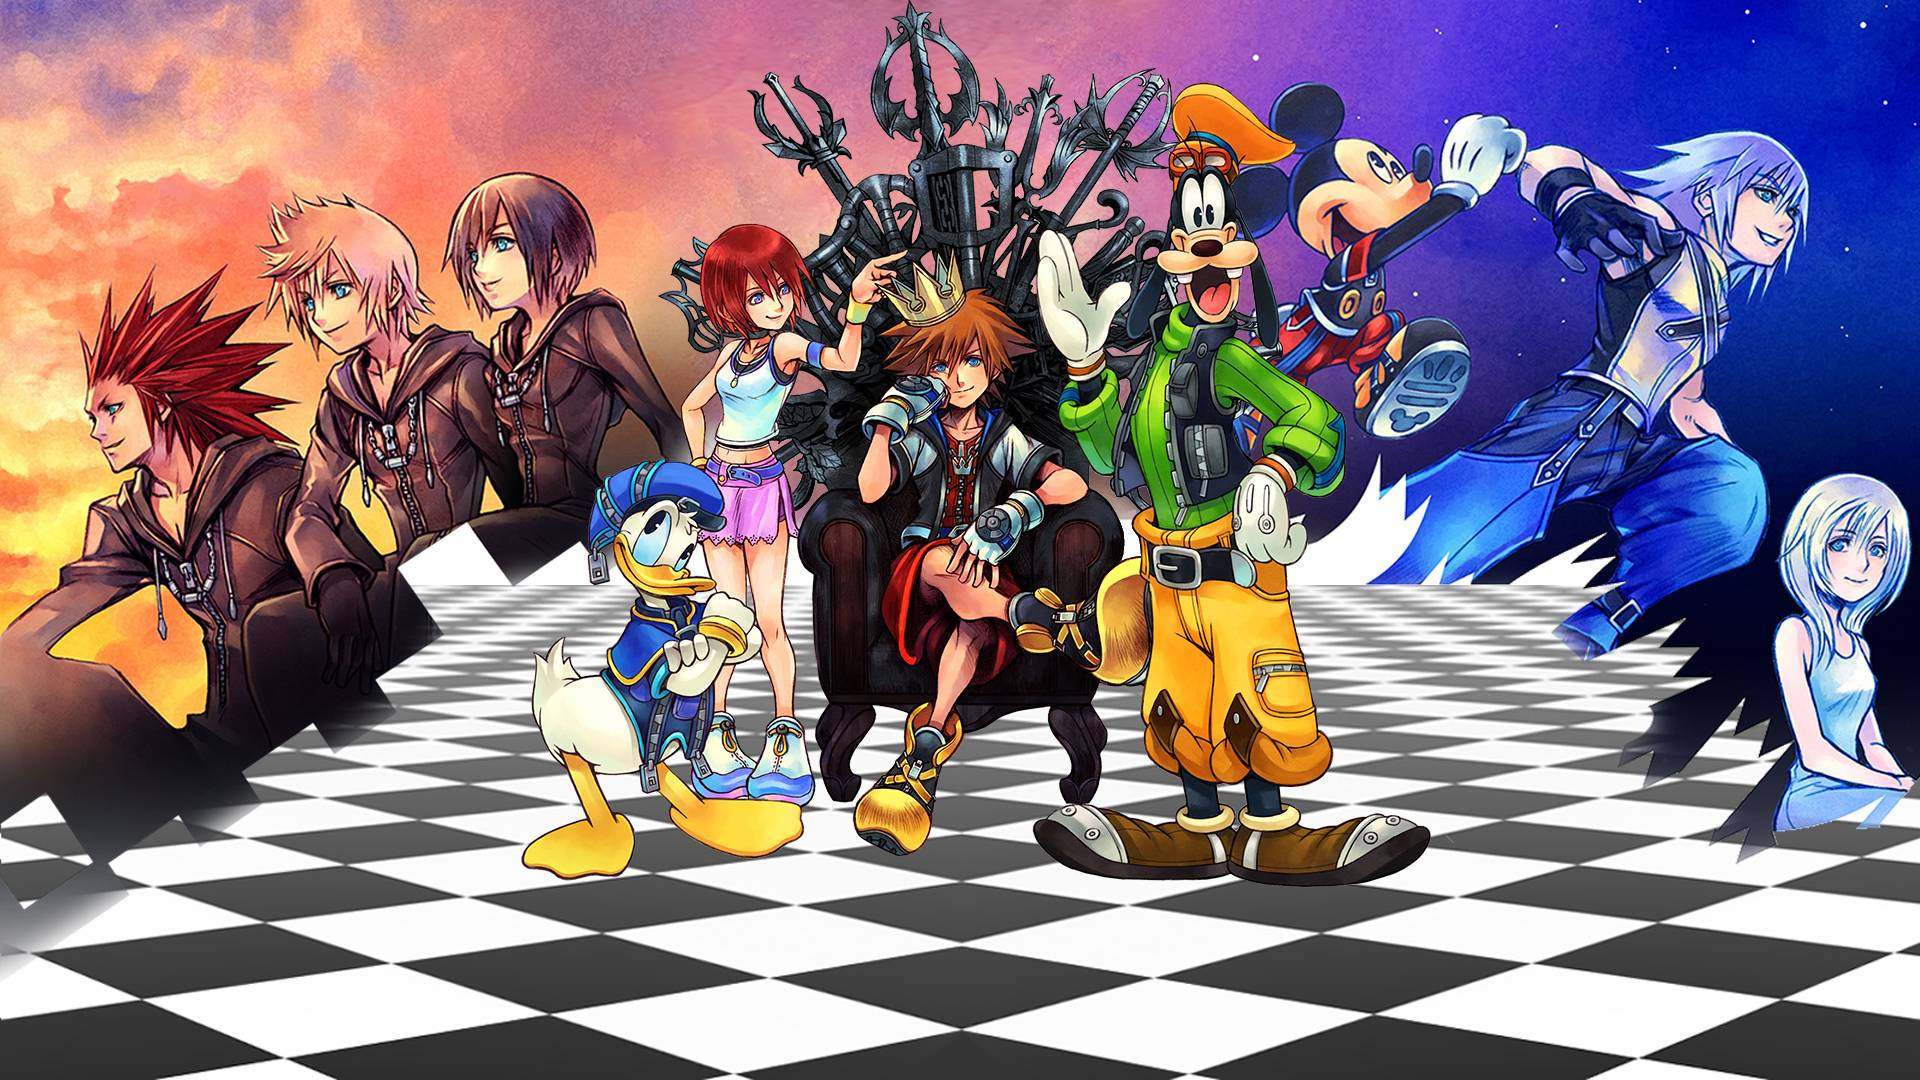 Kingdom Hearts: The Story So Far Part 3 - Let's Get Down To Dizness